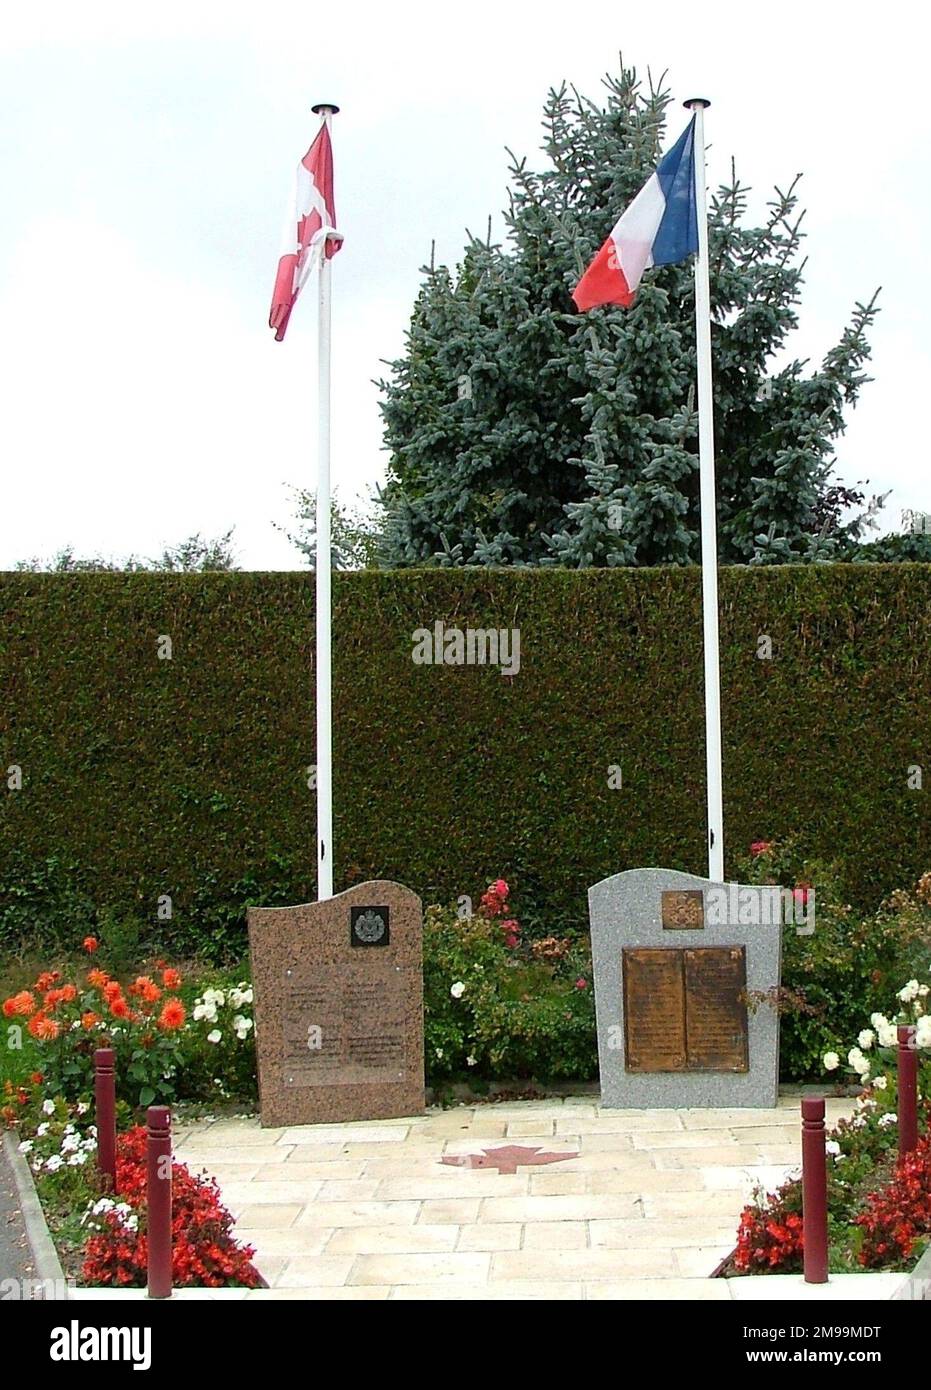 This double memorial has a plaque to the Rifles on the left and to the Scottish on the right. Between them is a poem by Paul Eluard. In front is a board describing the liberation of the village (Putot-en-Bessin) and the casualties, including 98 Germans & 256 Canadians, of whom 45 were massacred at Audrieu Chateau. Stock Photo